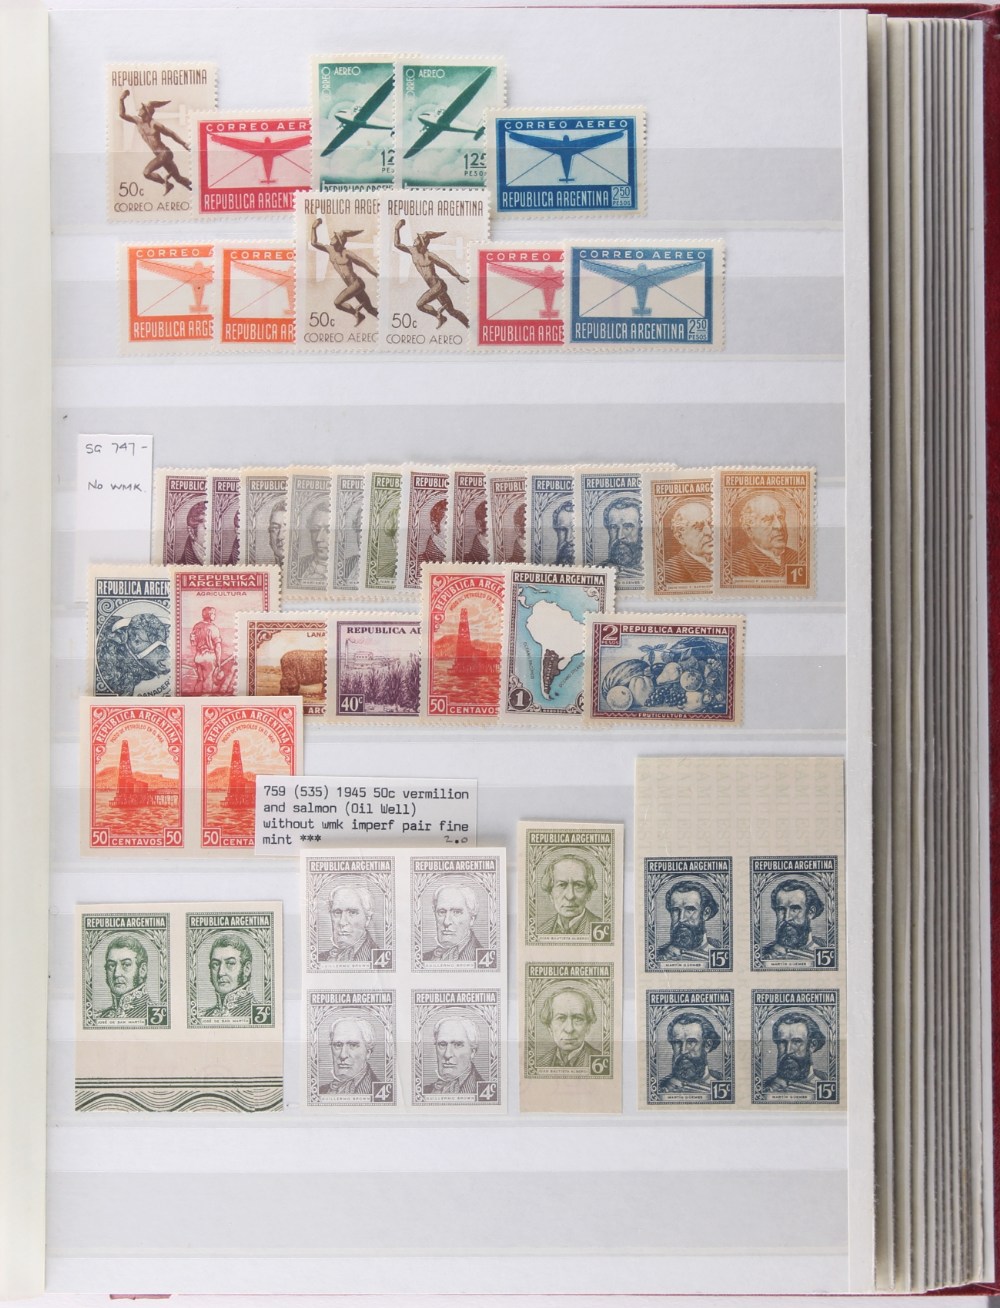 The Basil Lewis (1927-2019) collection of stamps - Argentina: Two stock books of material